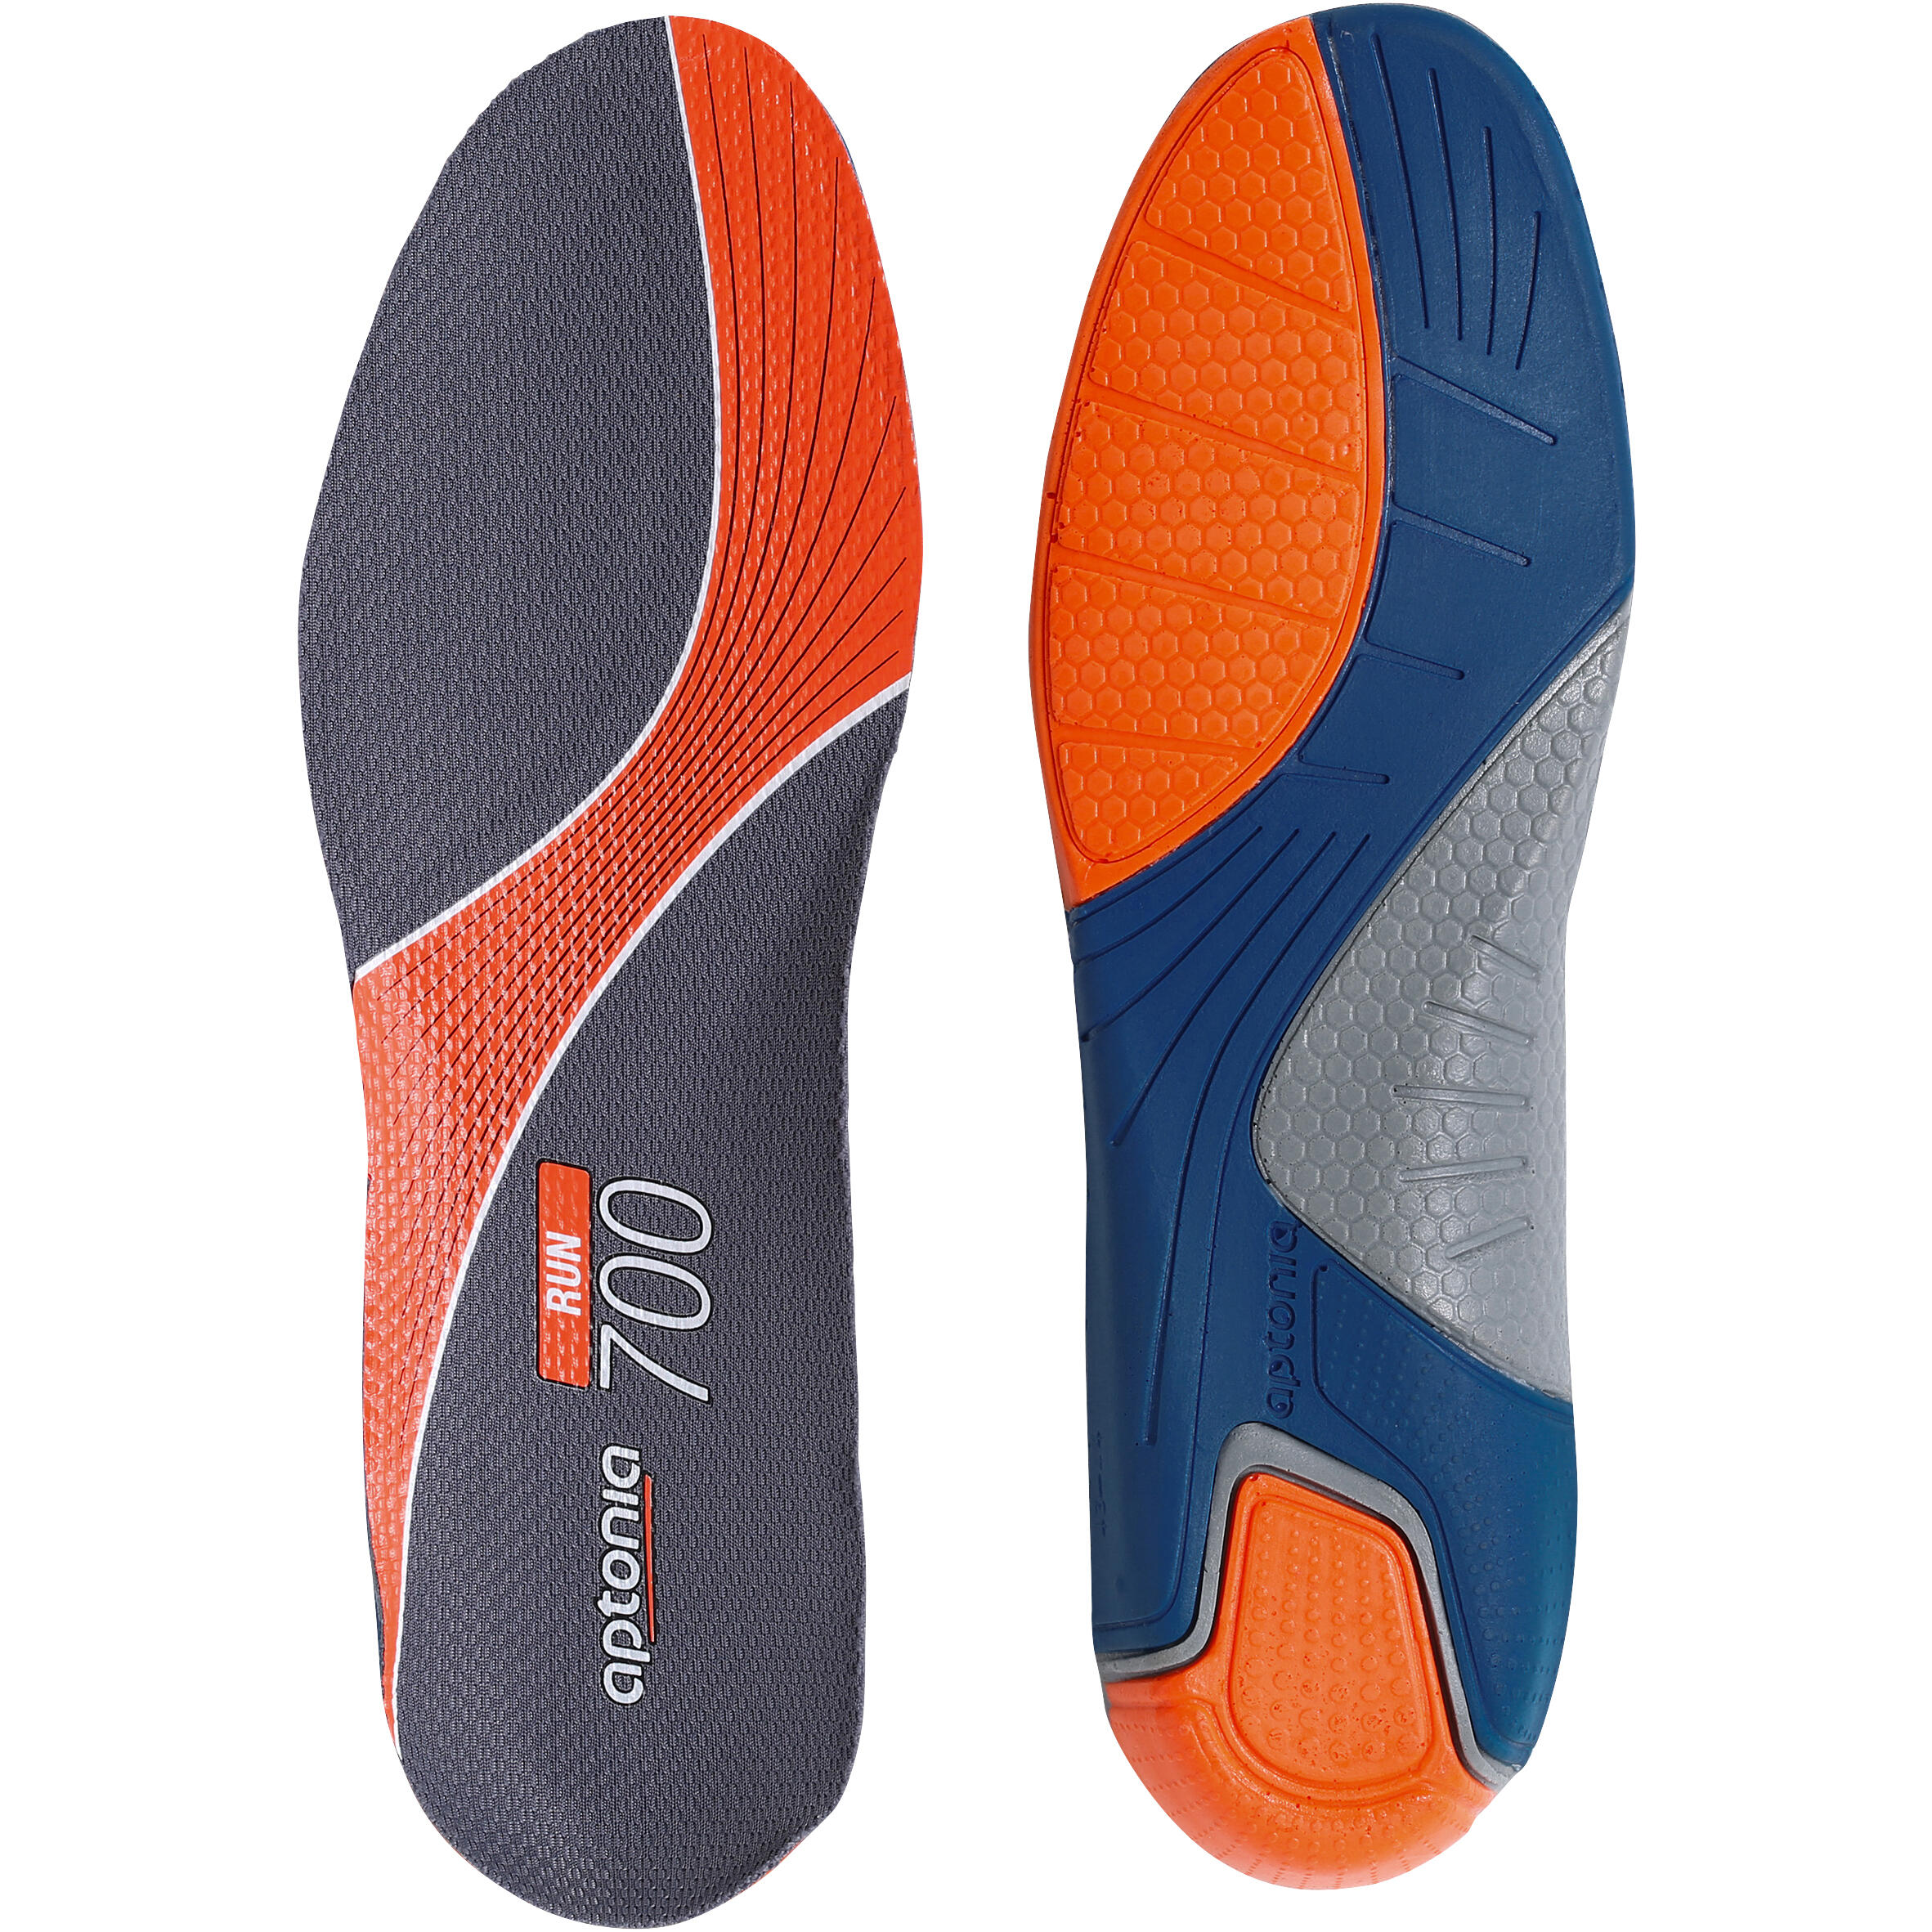 Running Insoles - Shoe Insoles for 